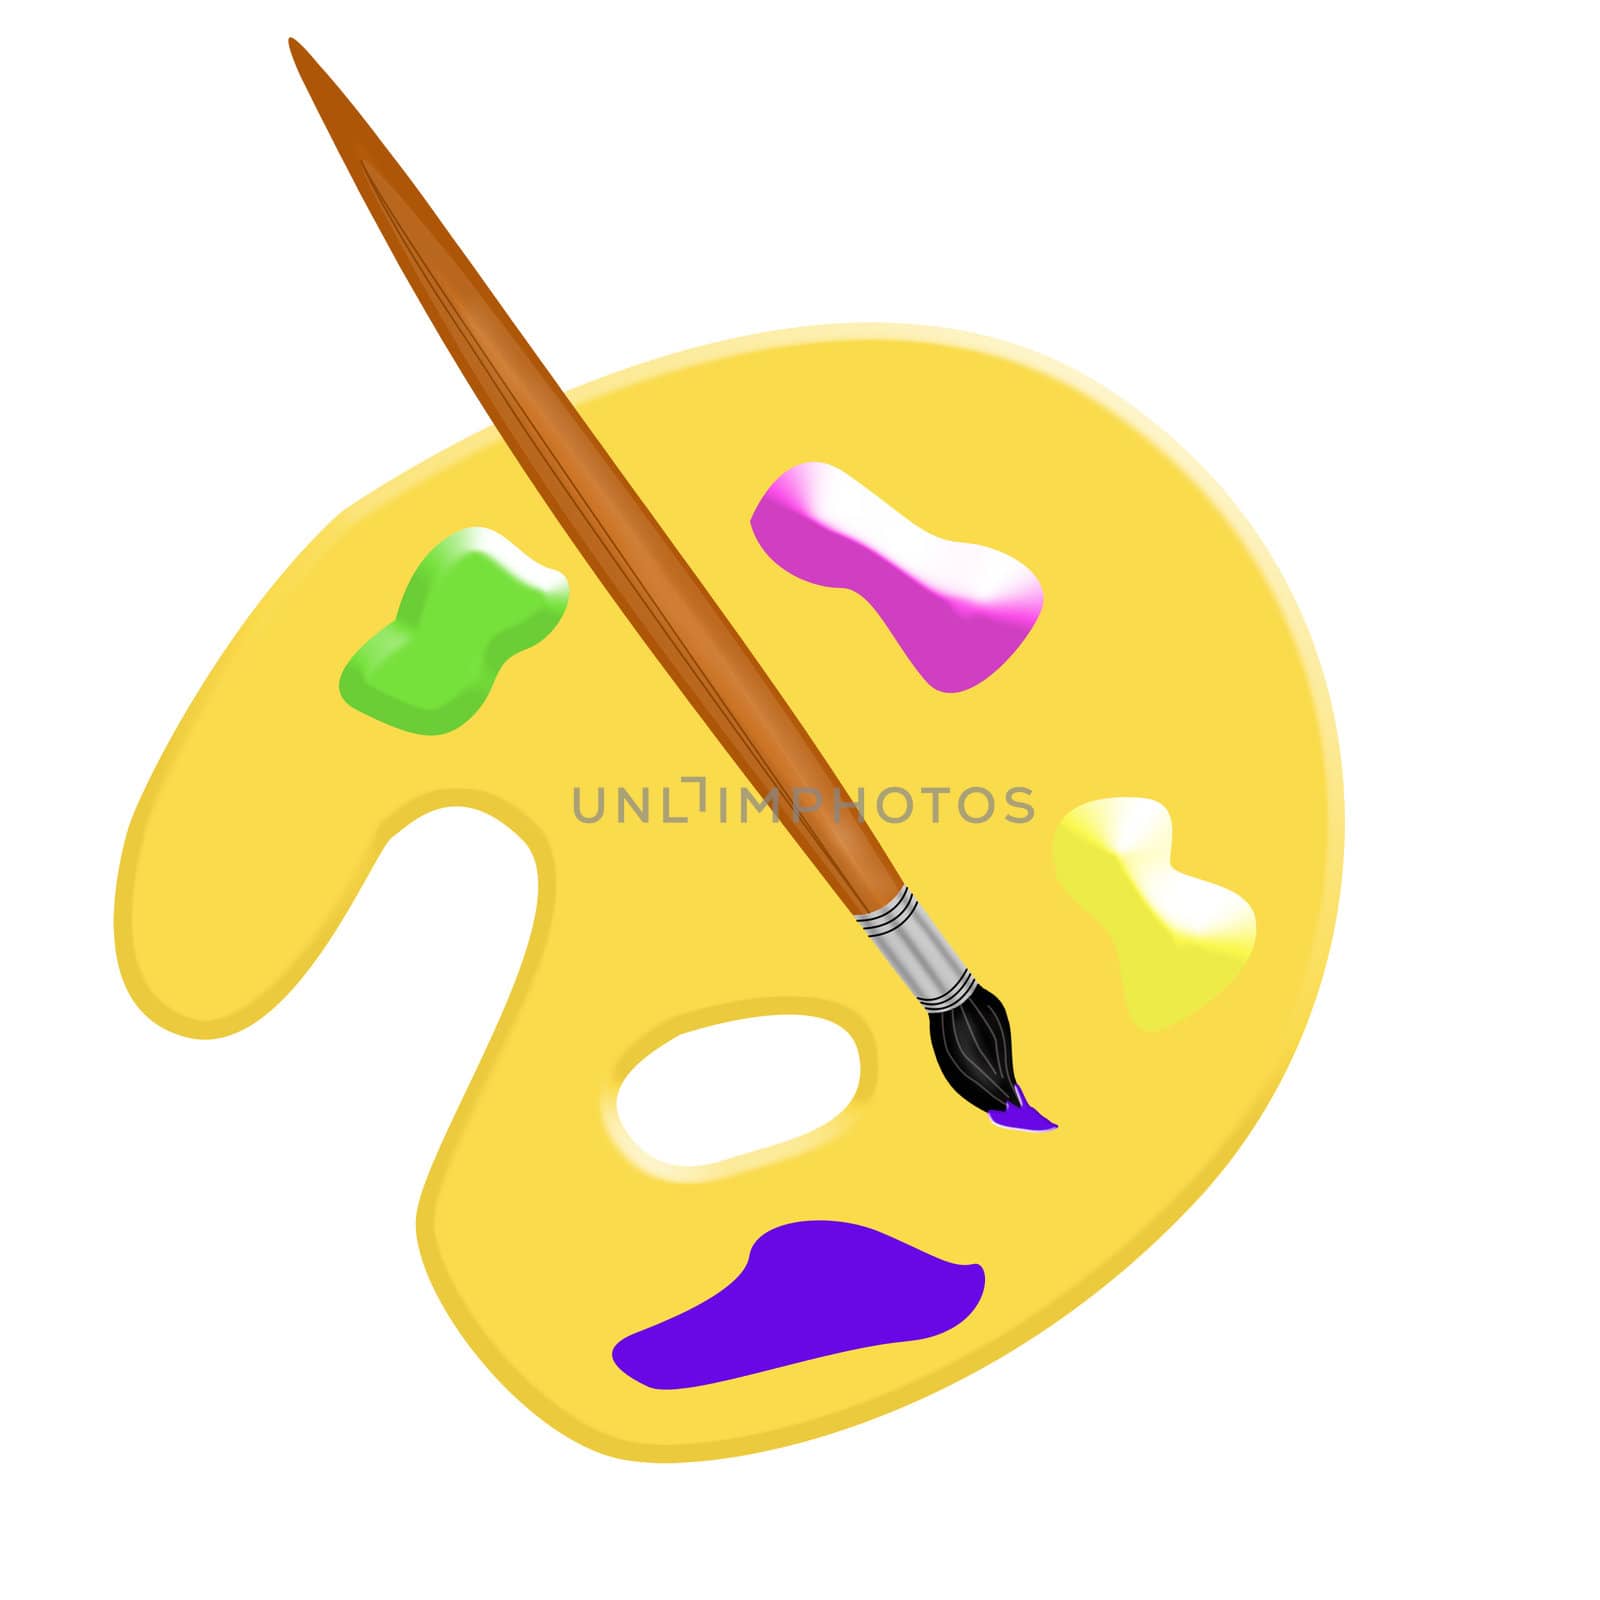 Artist Palette with Painting Brush illustration isolated on a white background.